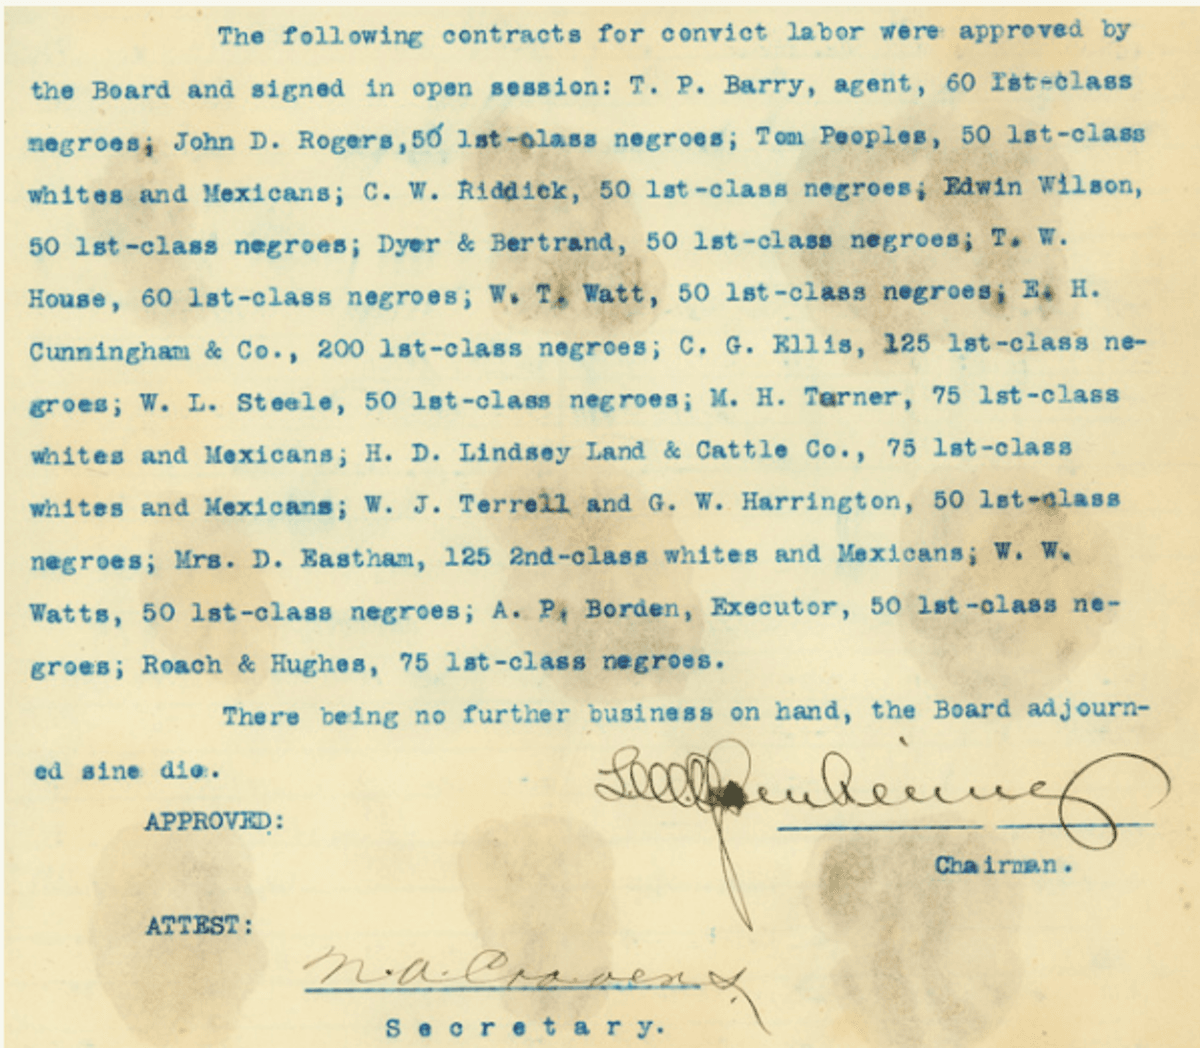 Excerpt from minutes of the regular meeting of the Texas Penitentiary Board, Nov. 12, 1903.